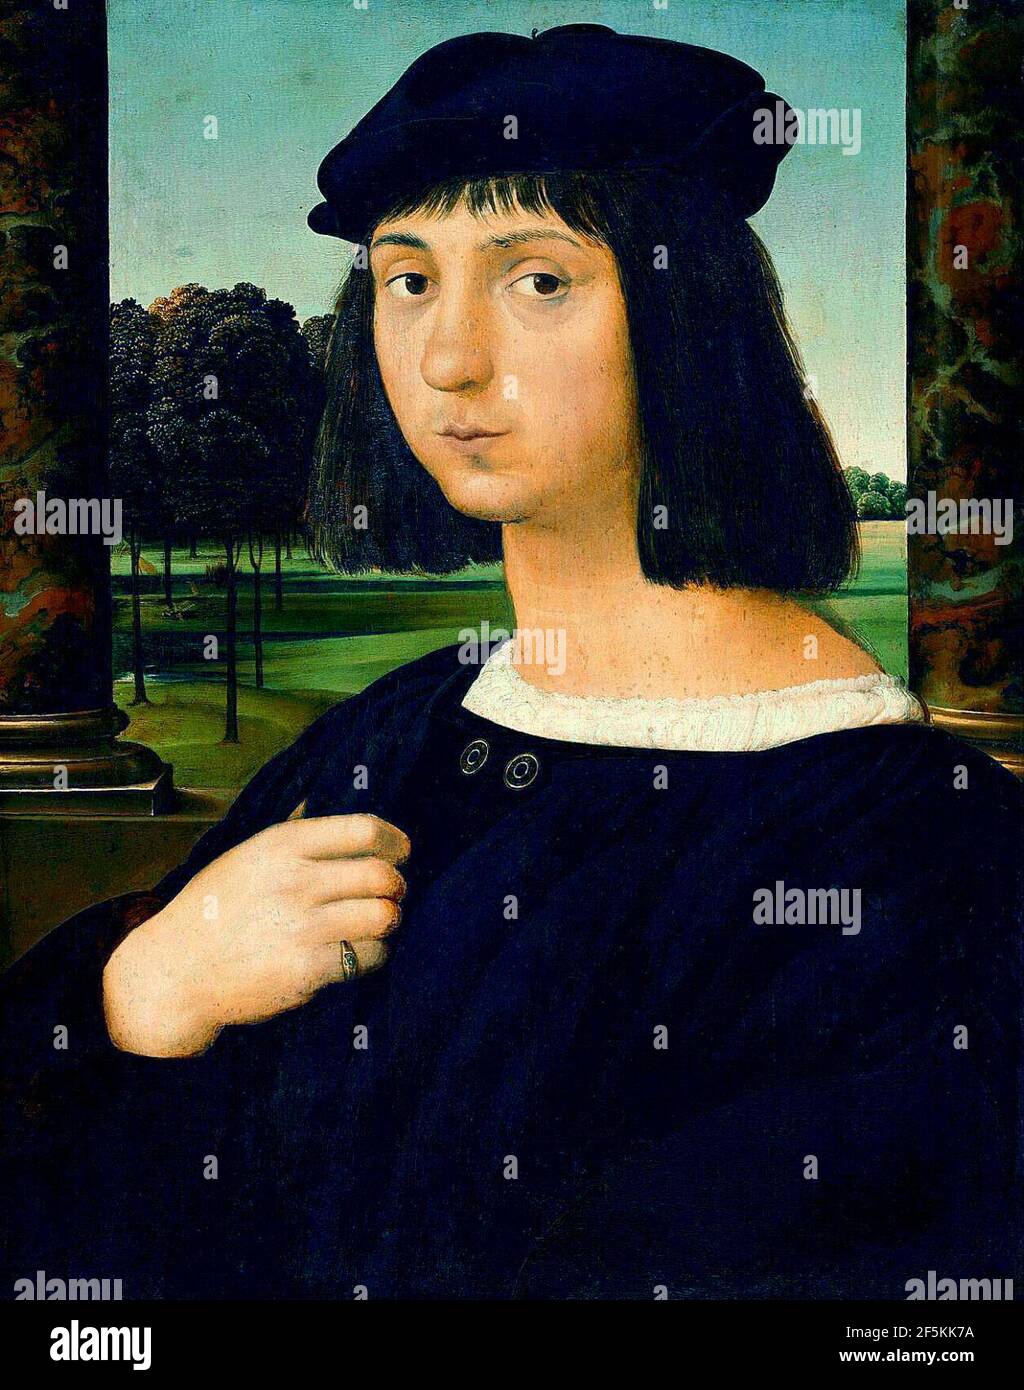 Raphael - Portrait of a Young Man Stock Photo - Alamy